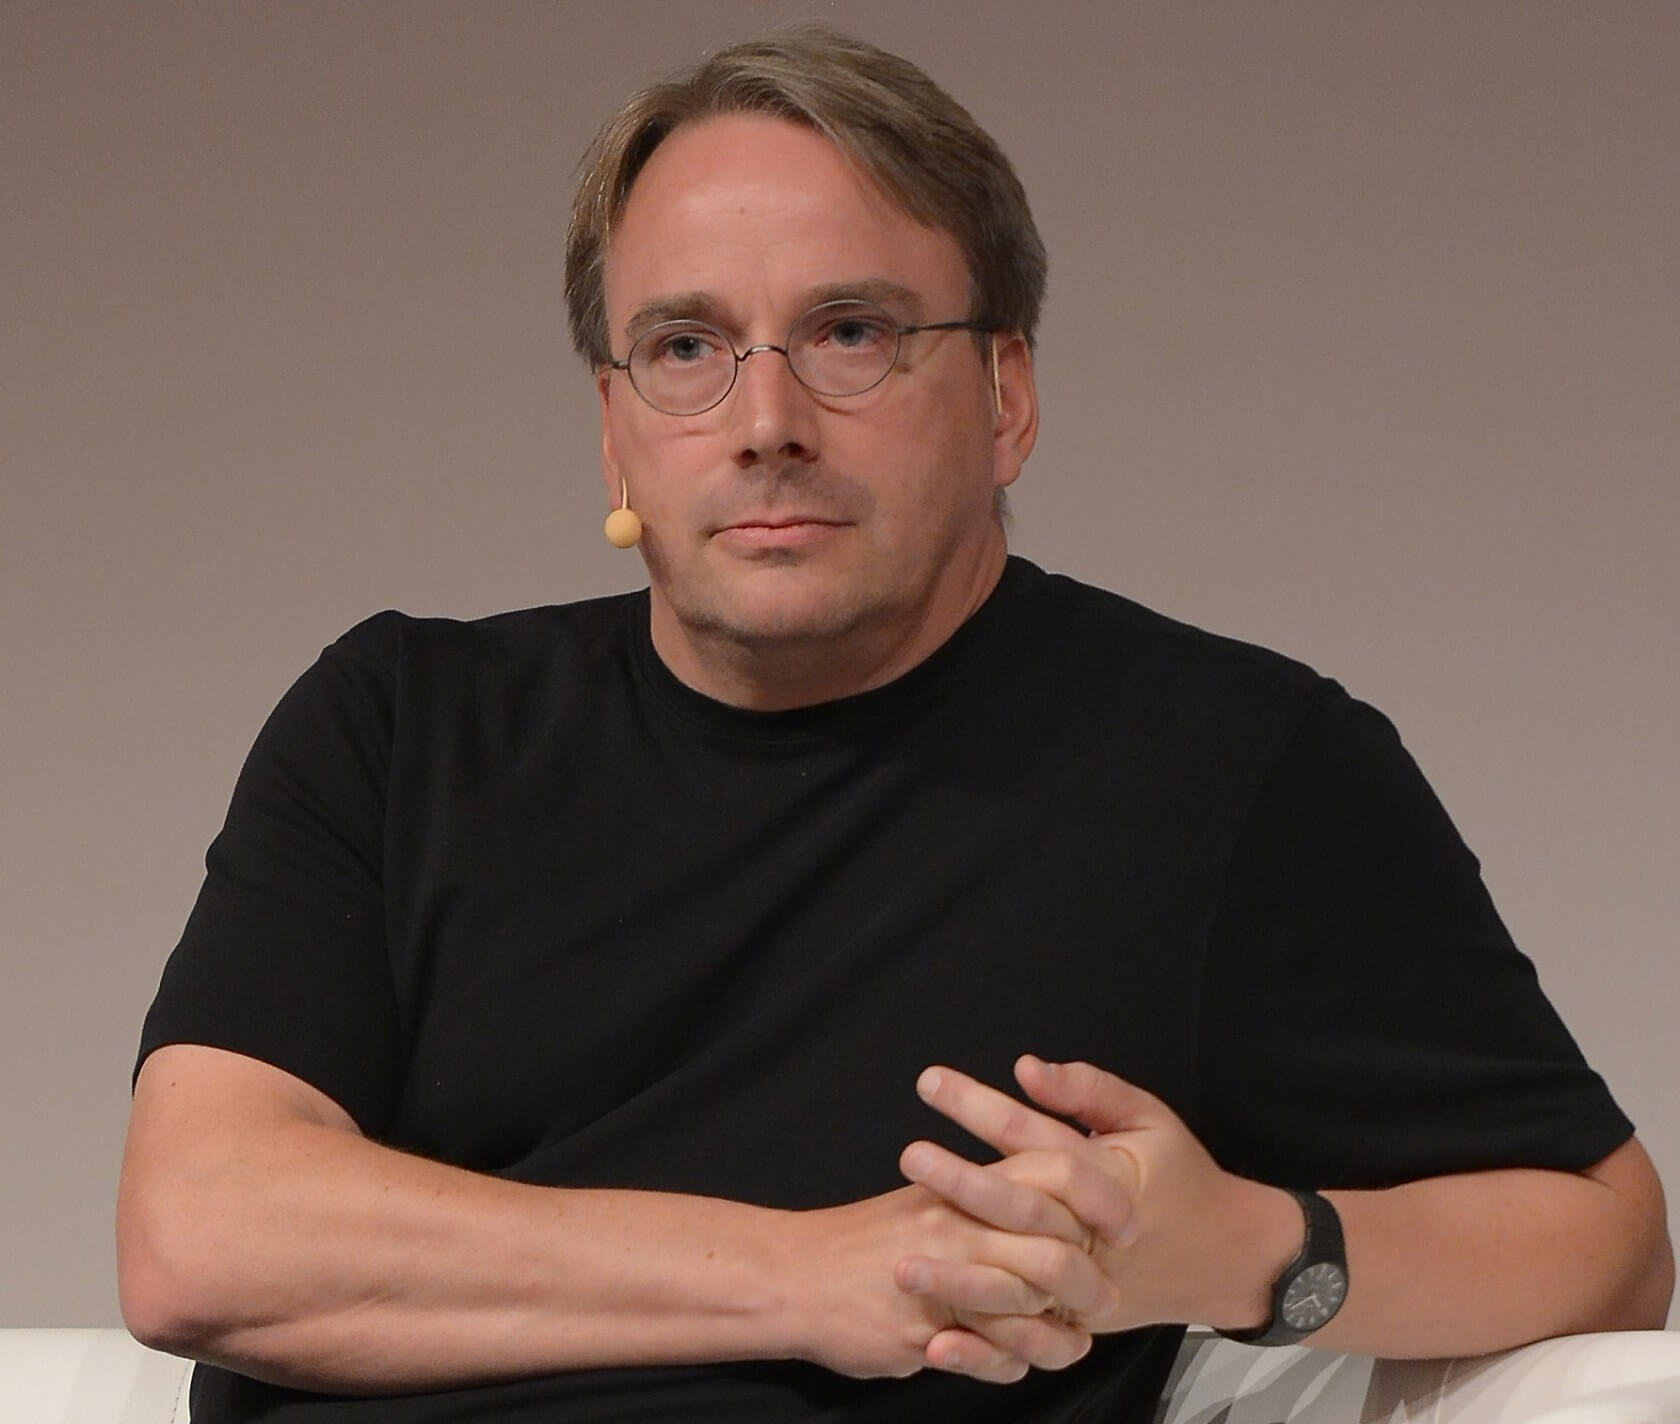 Linus Torvalds apologizes for years of unprofessional rants, is taking break from Linux